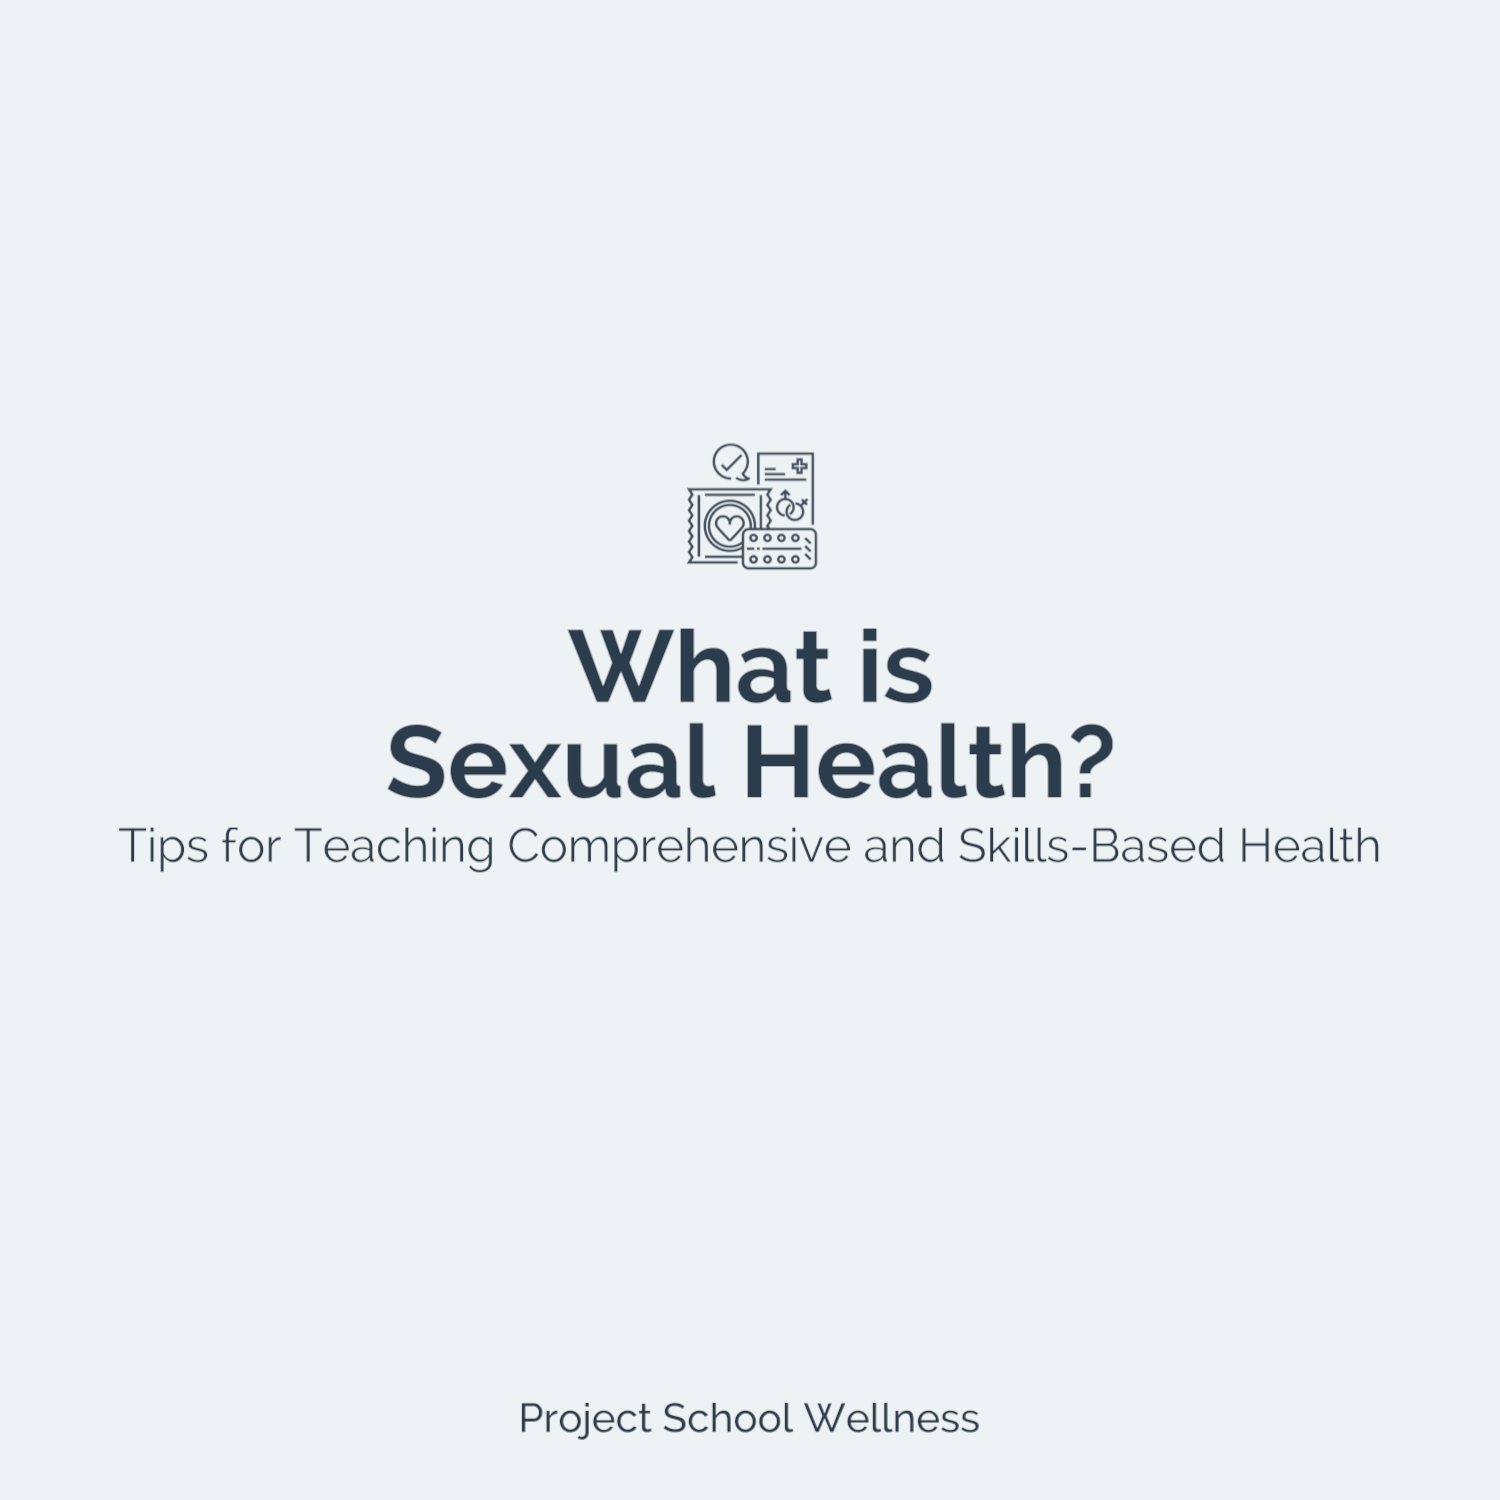 PSW Blog - What is Sexual Health?